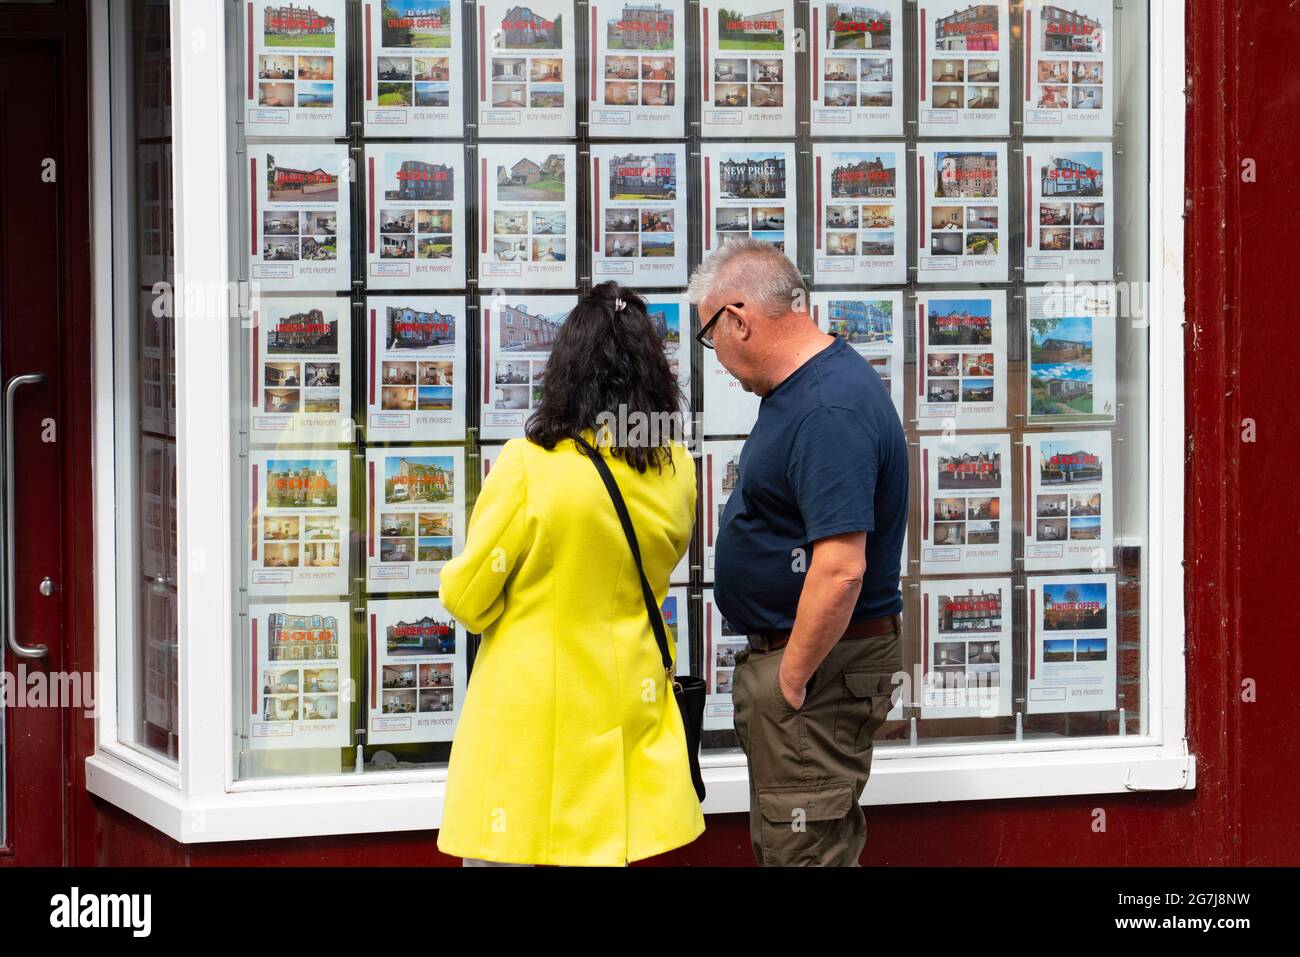 Two member so f public looking at houses for sale in wind ow of property estate agency in Rothesay , Isle of Bute, Scotland, UK Stock Photo